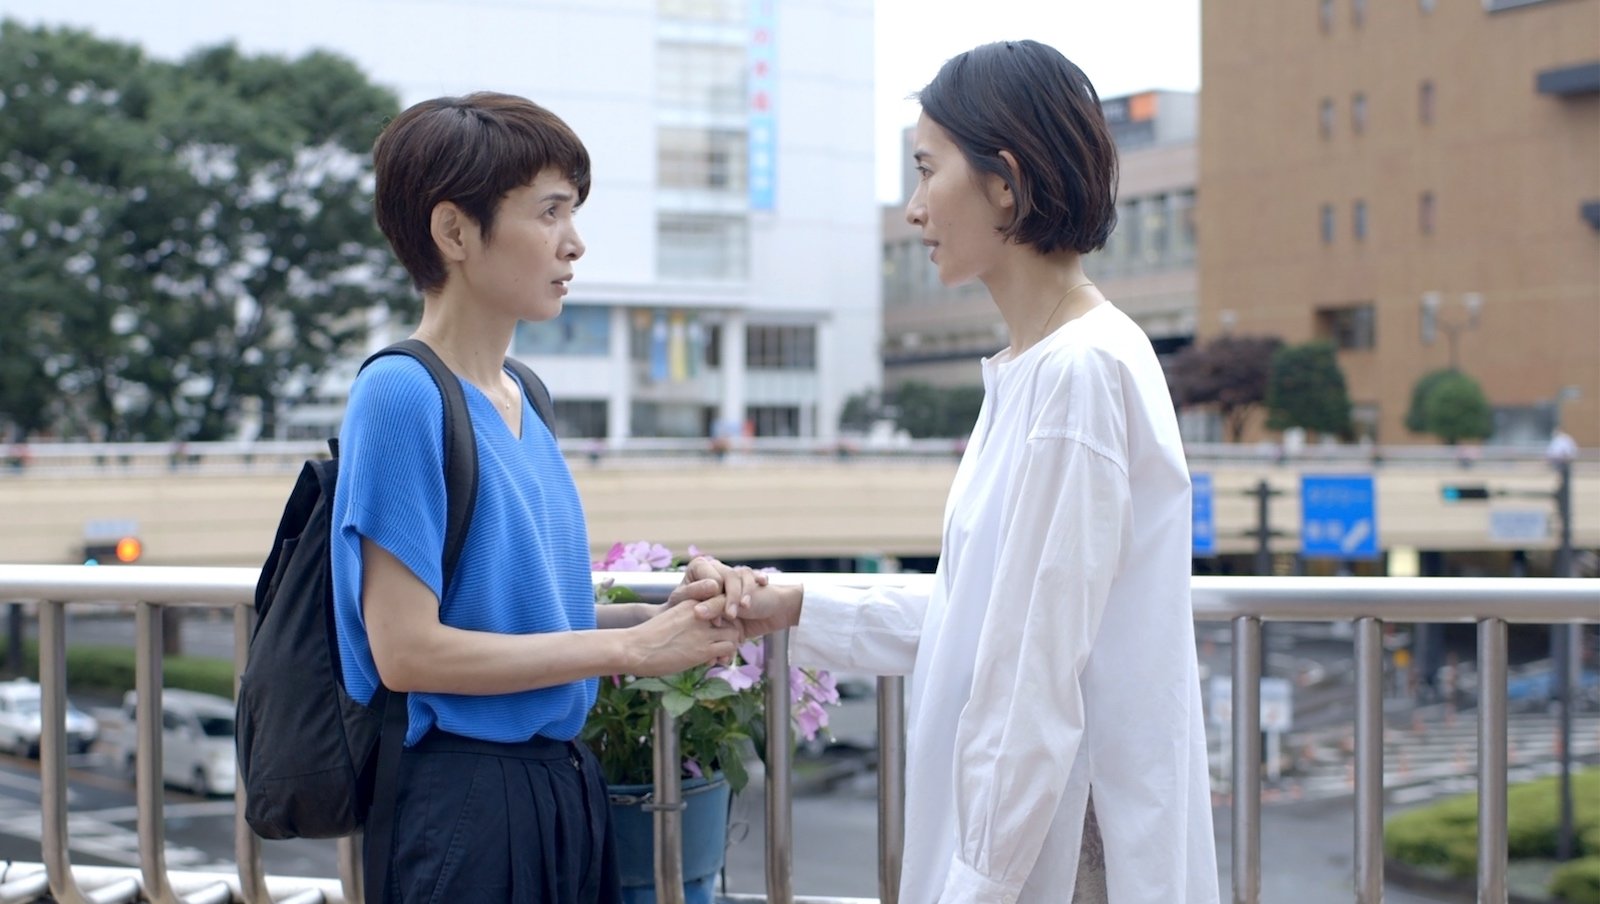 Two women, one in white and one in blue, talk to each other against an outdoor cityscape